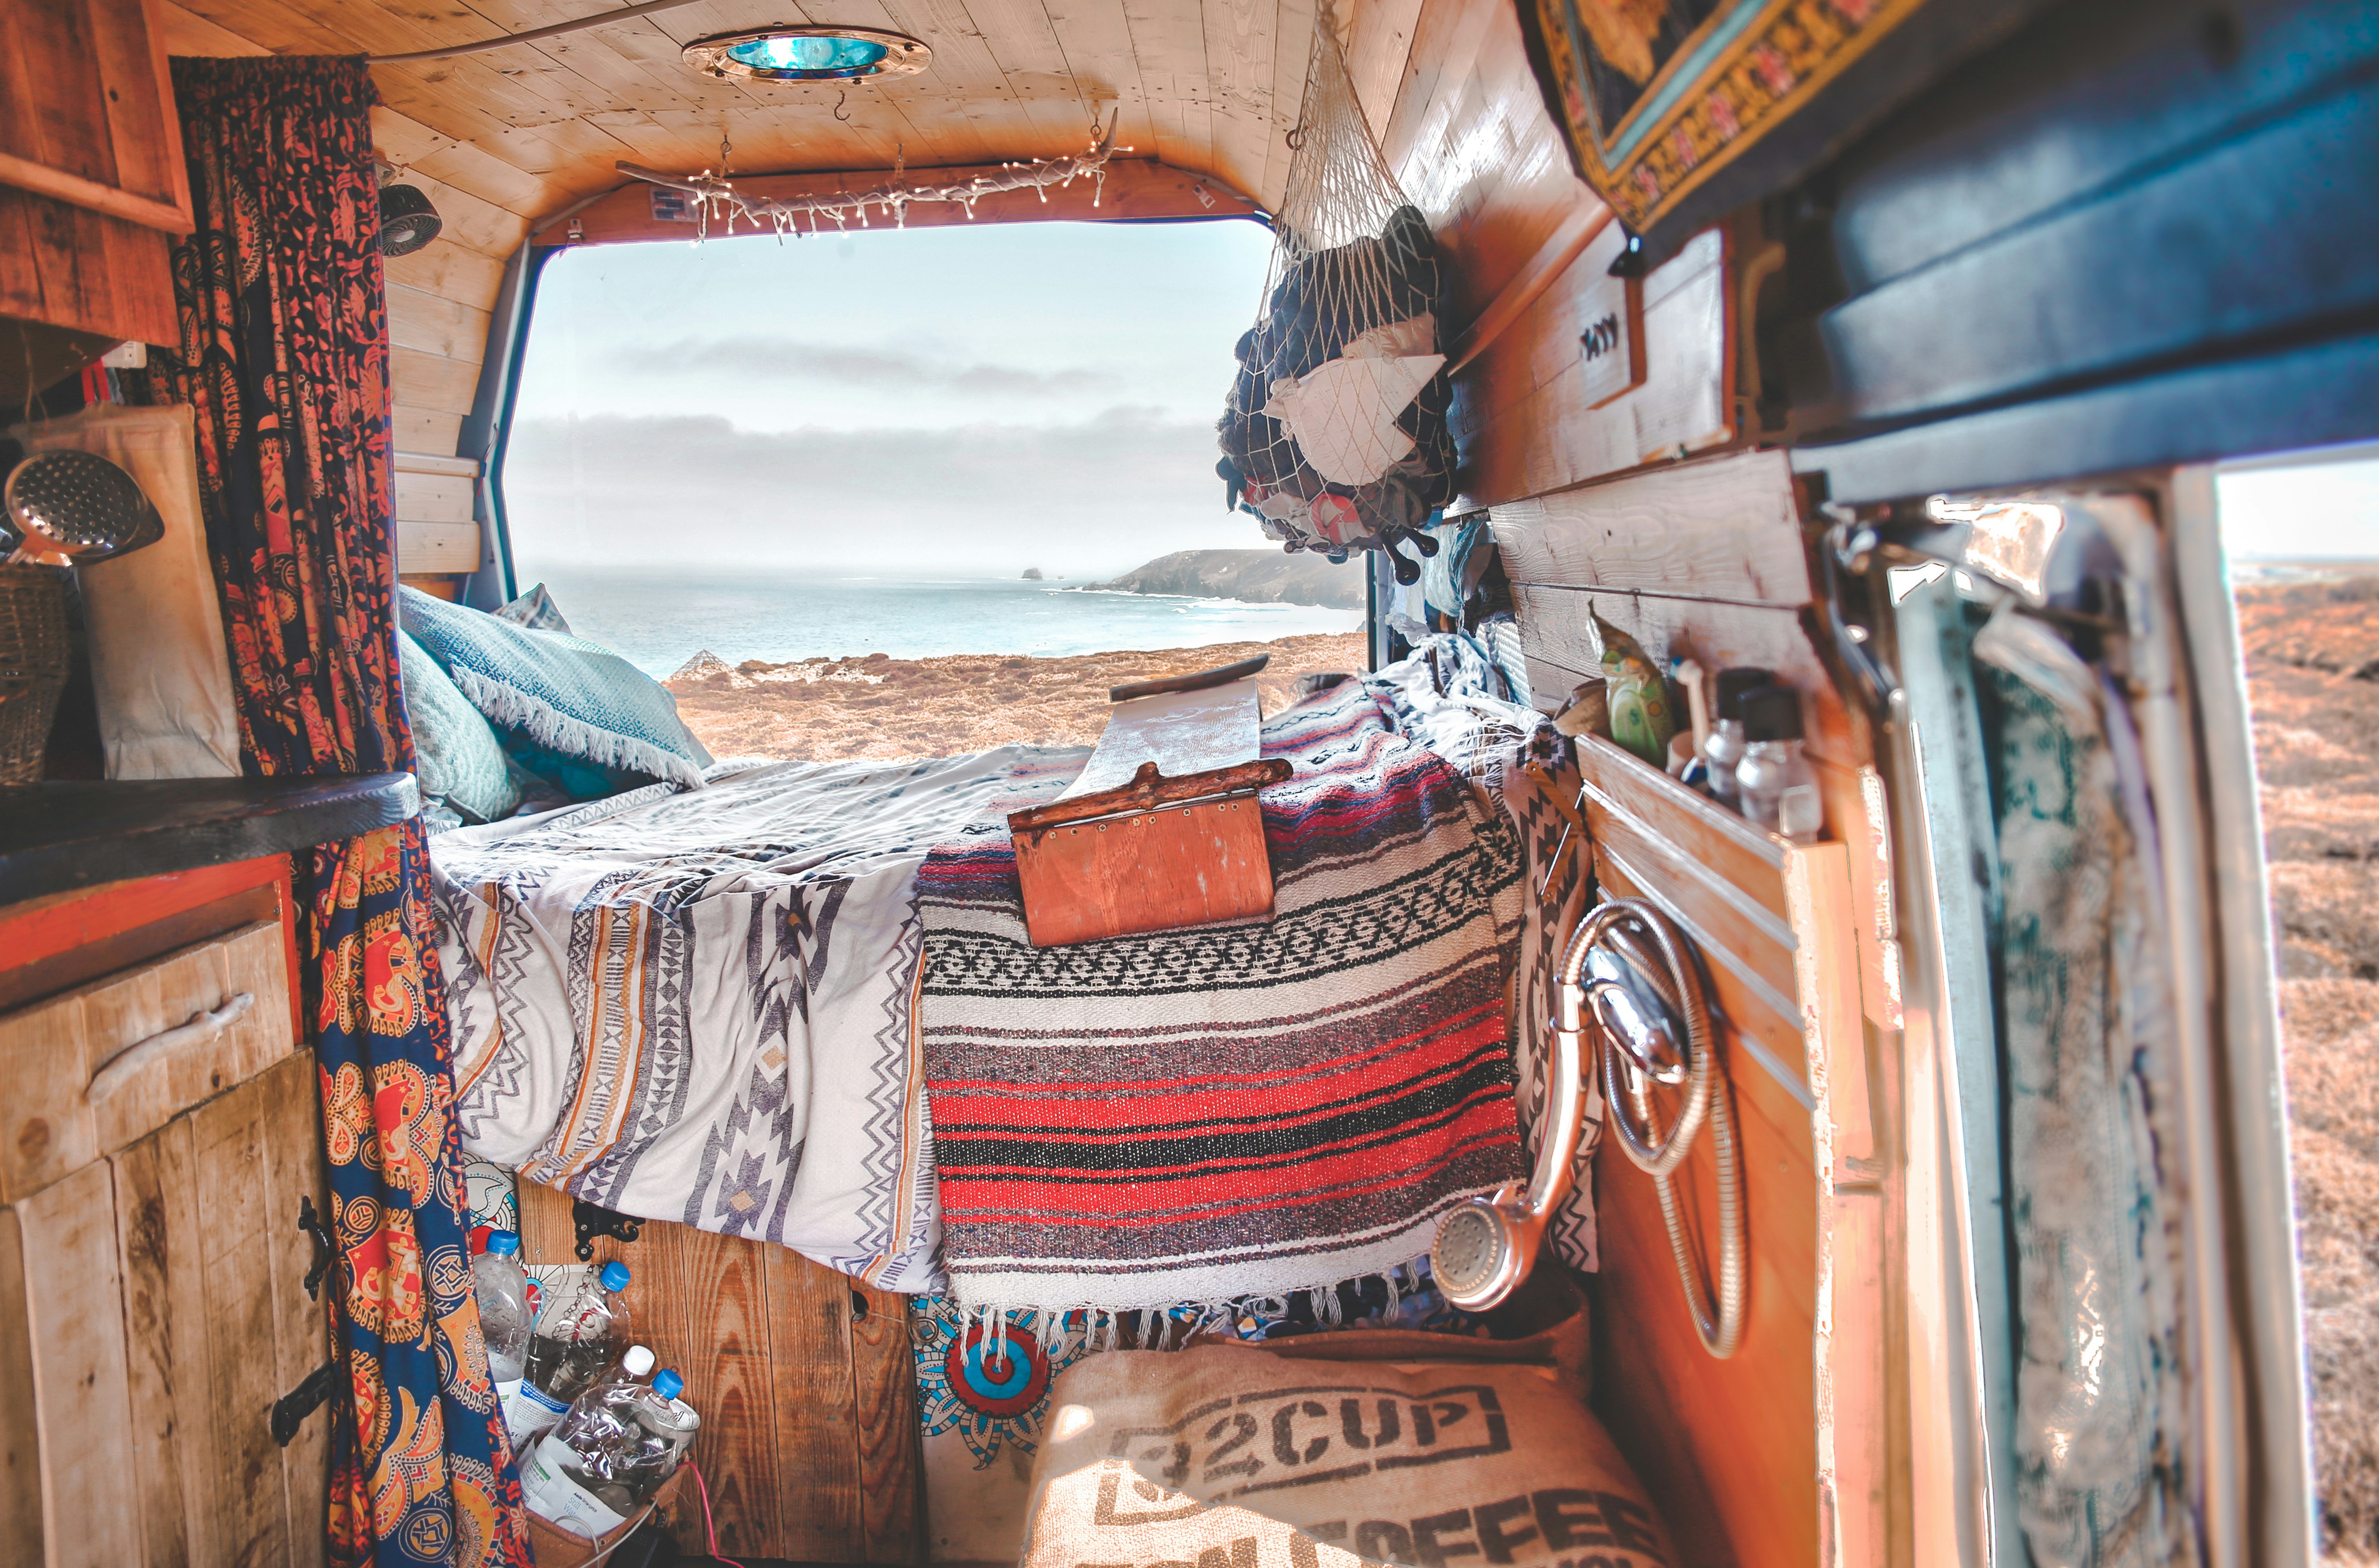 A cosy camper van with a view of the baech